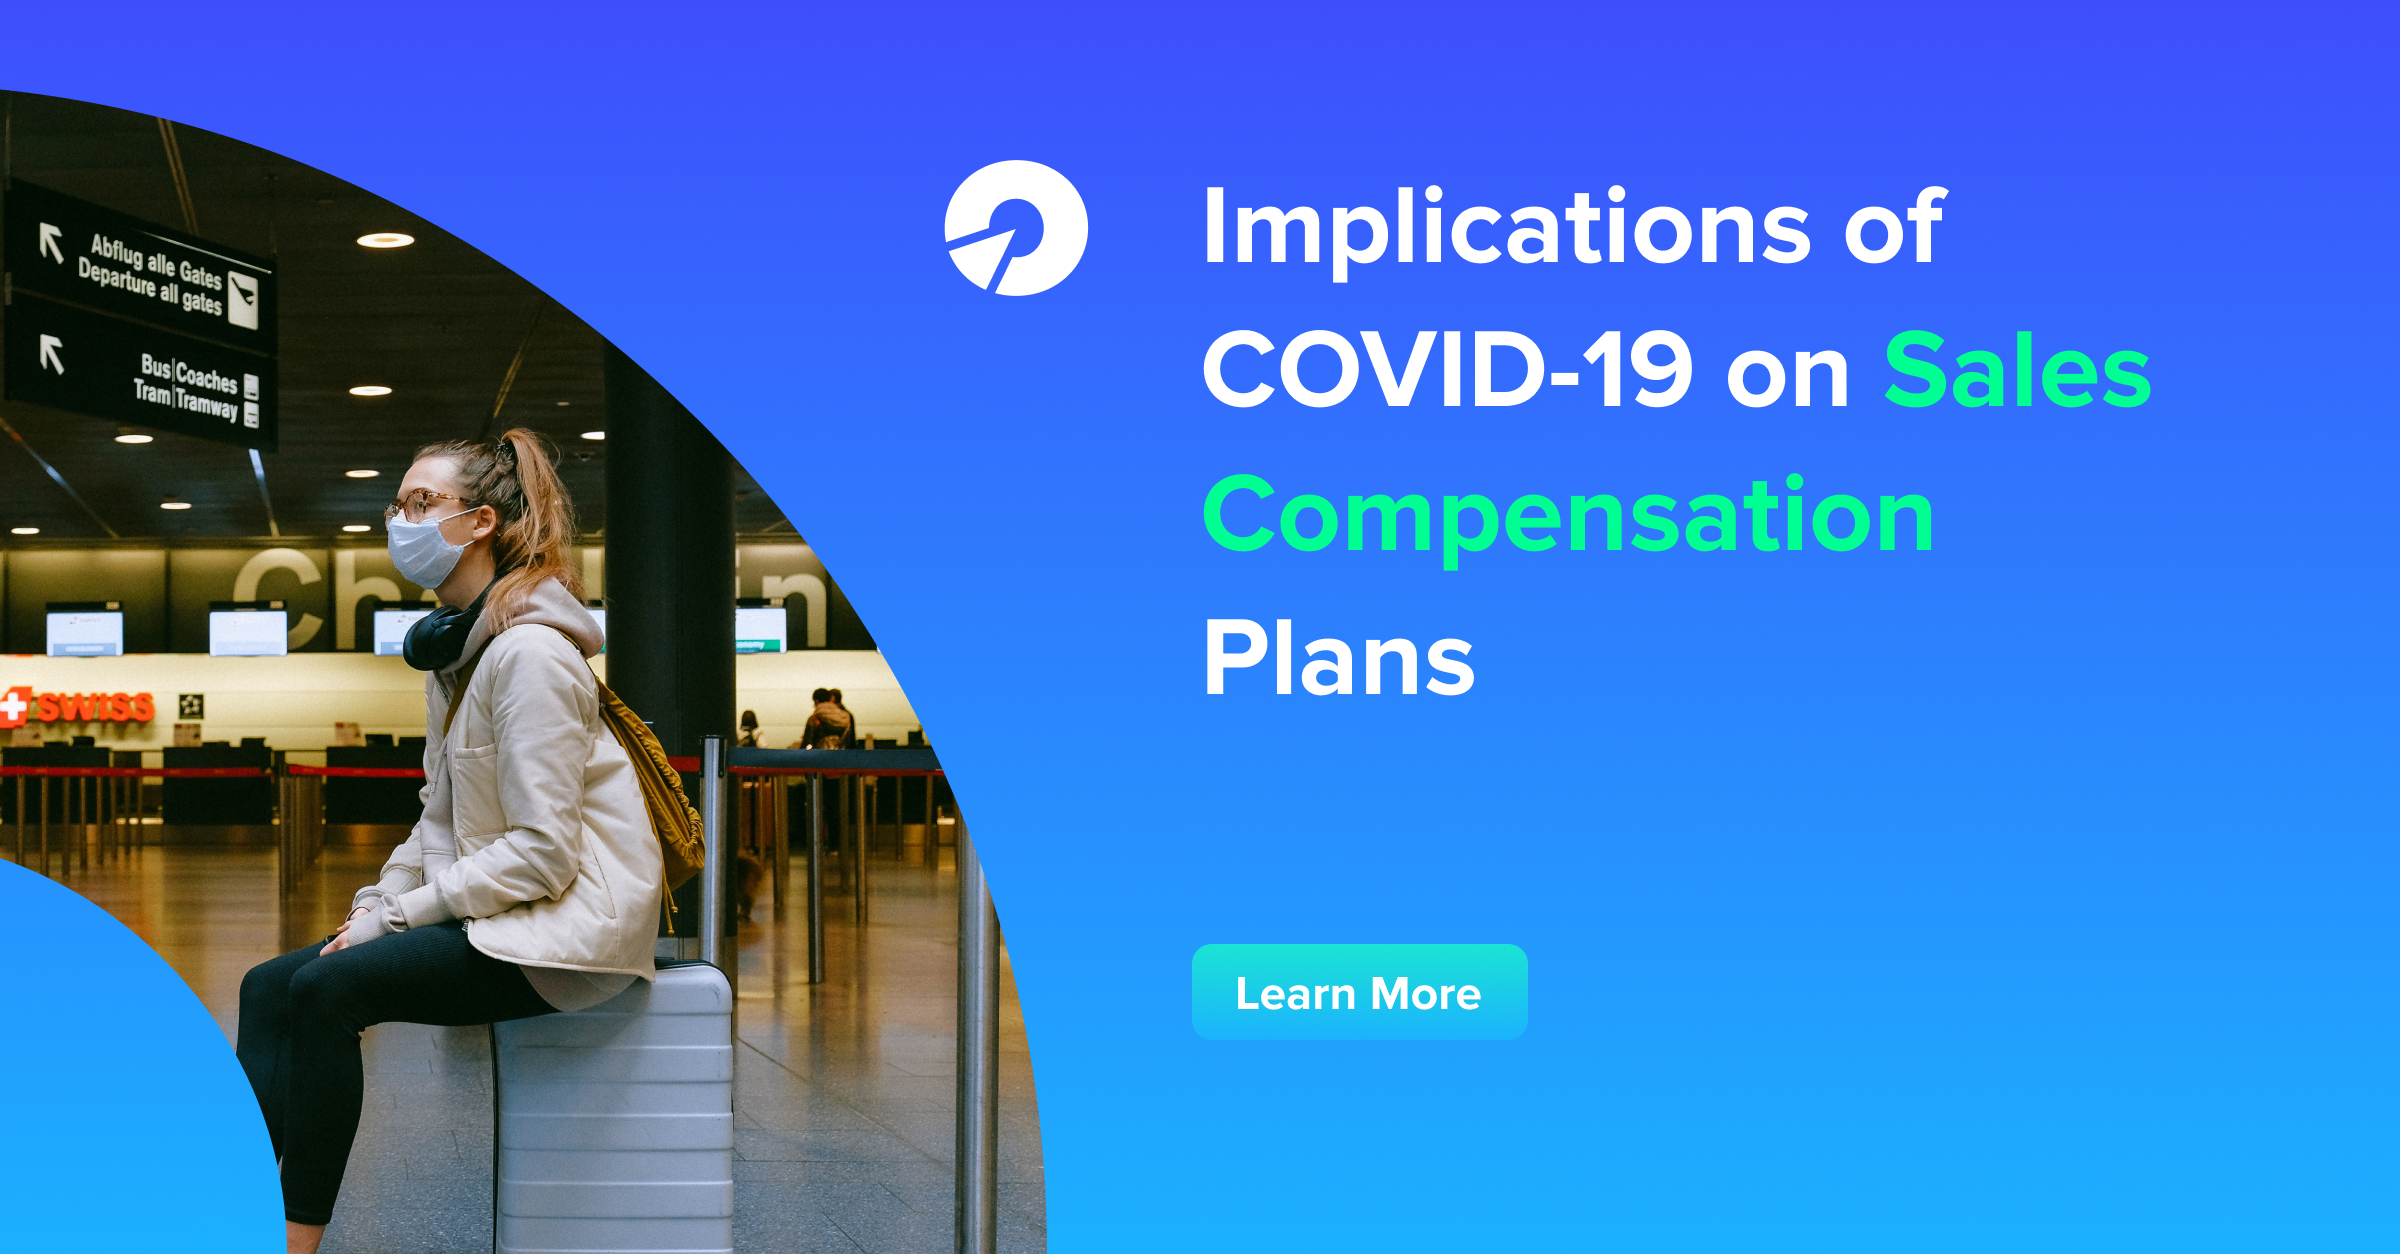 Implications of COVID-19 on Sales Compensation Plans